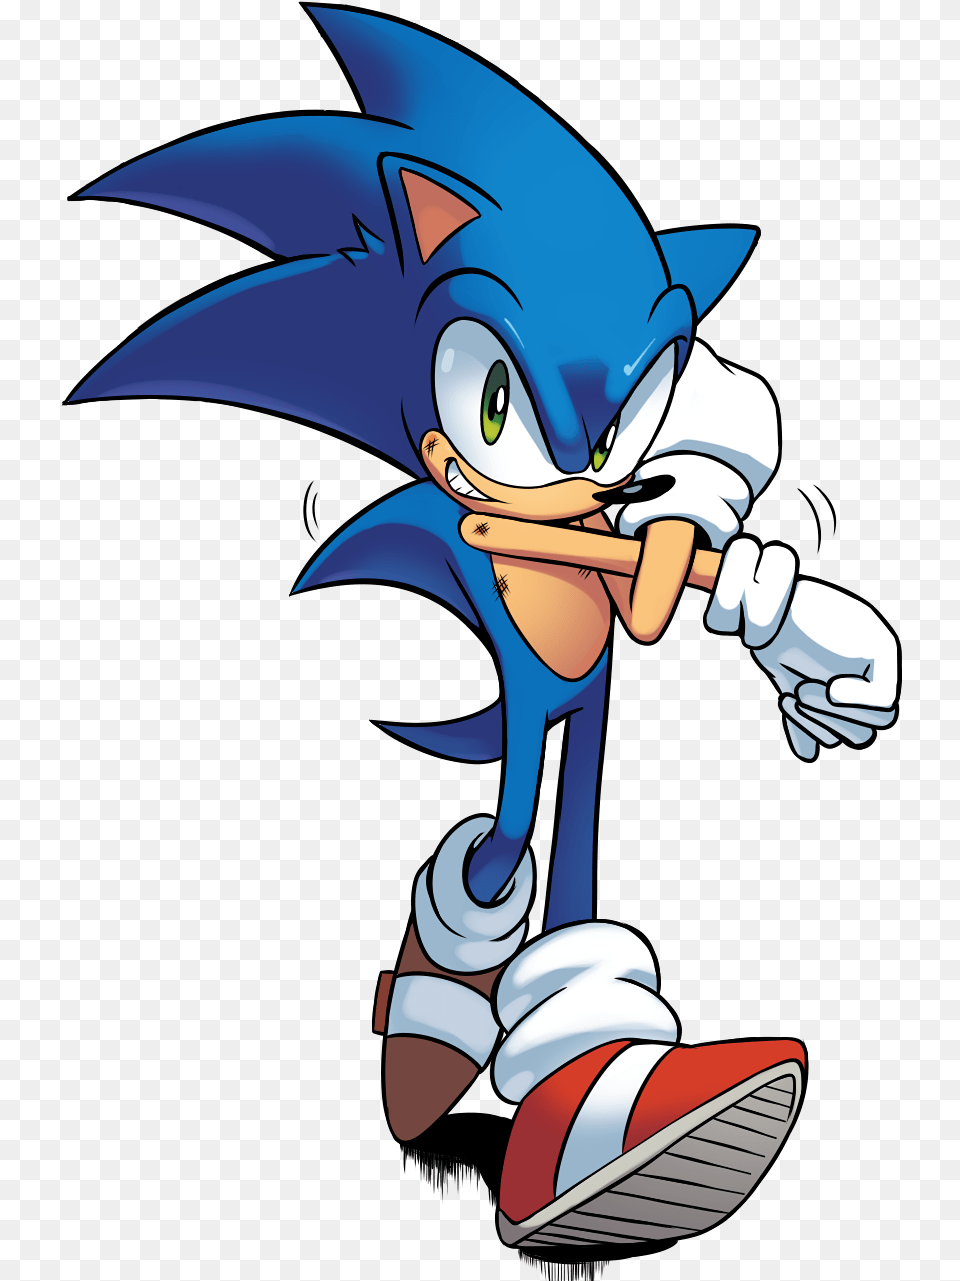 A Sonic From Archie Sonic Online Archie Sonic, Book, Comics, Publication, Cartoon Png Image